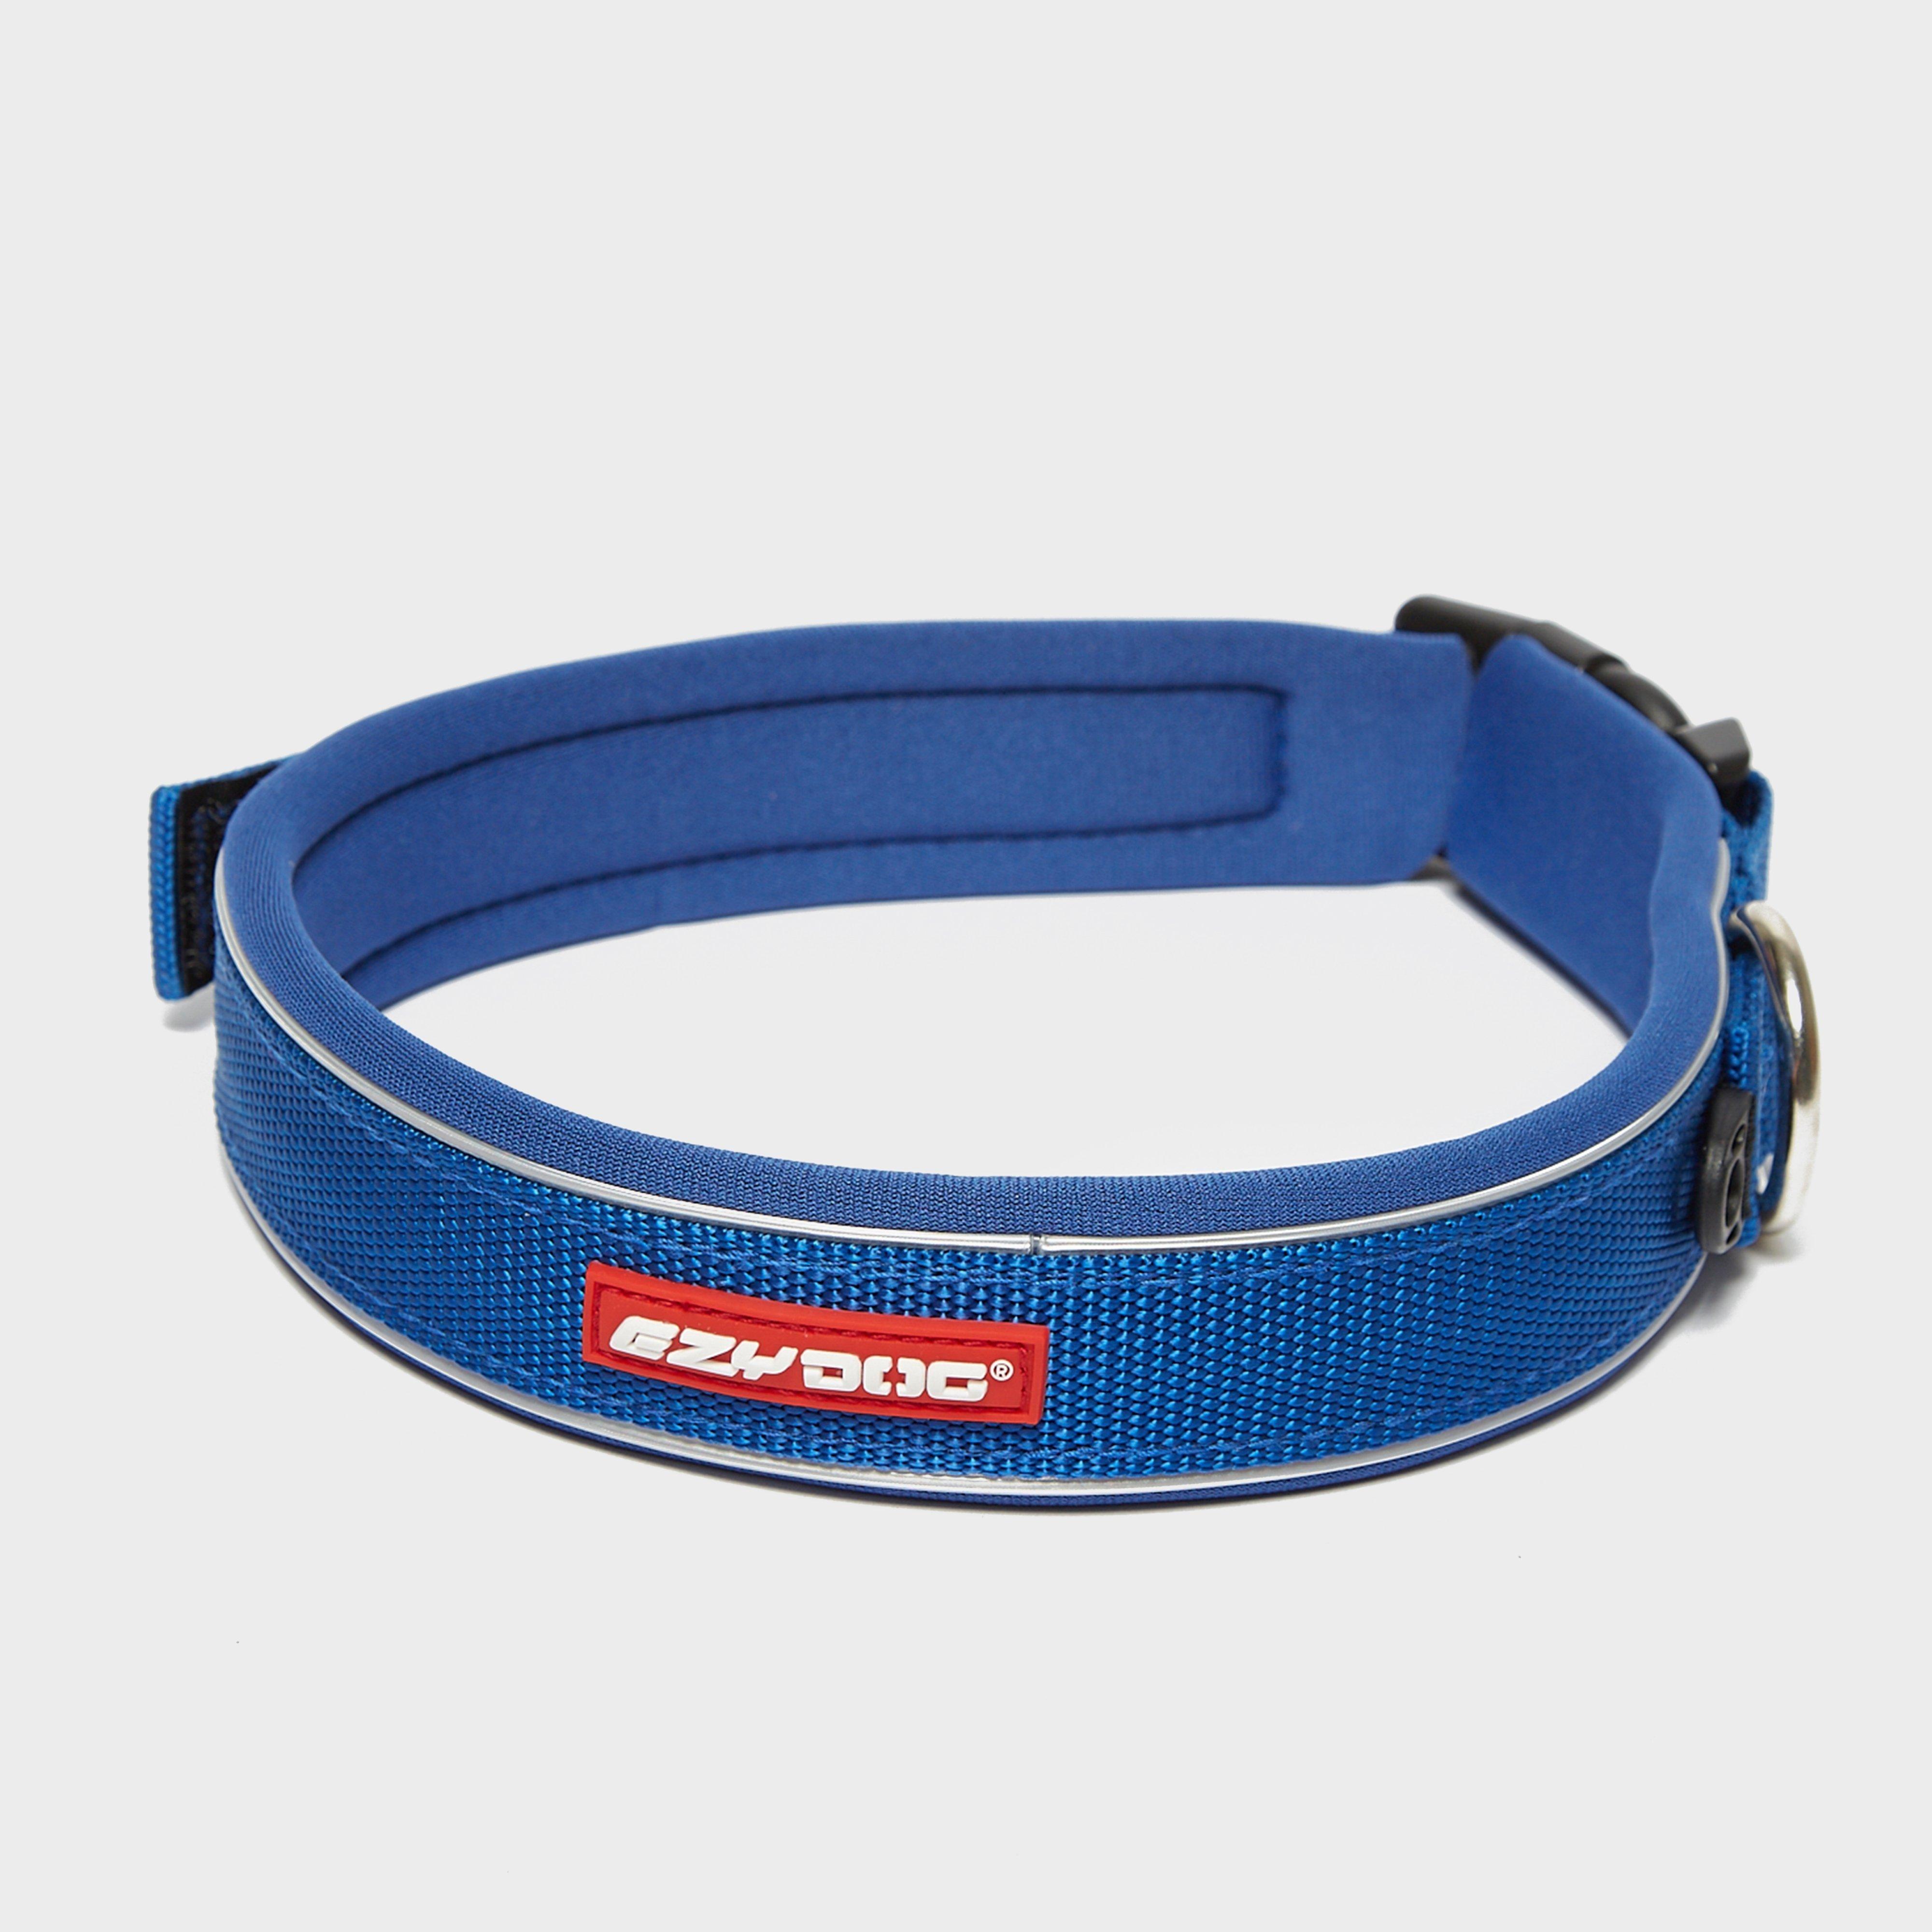 Ezy-Dog Neo Classic Collar (XL) Review